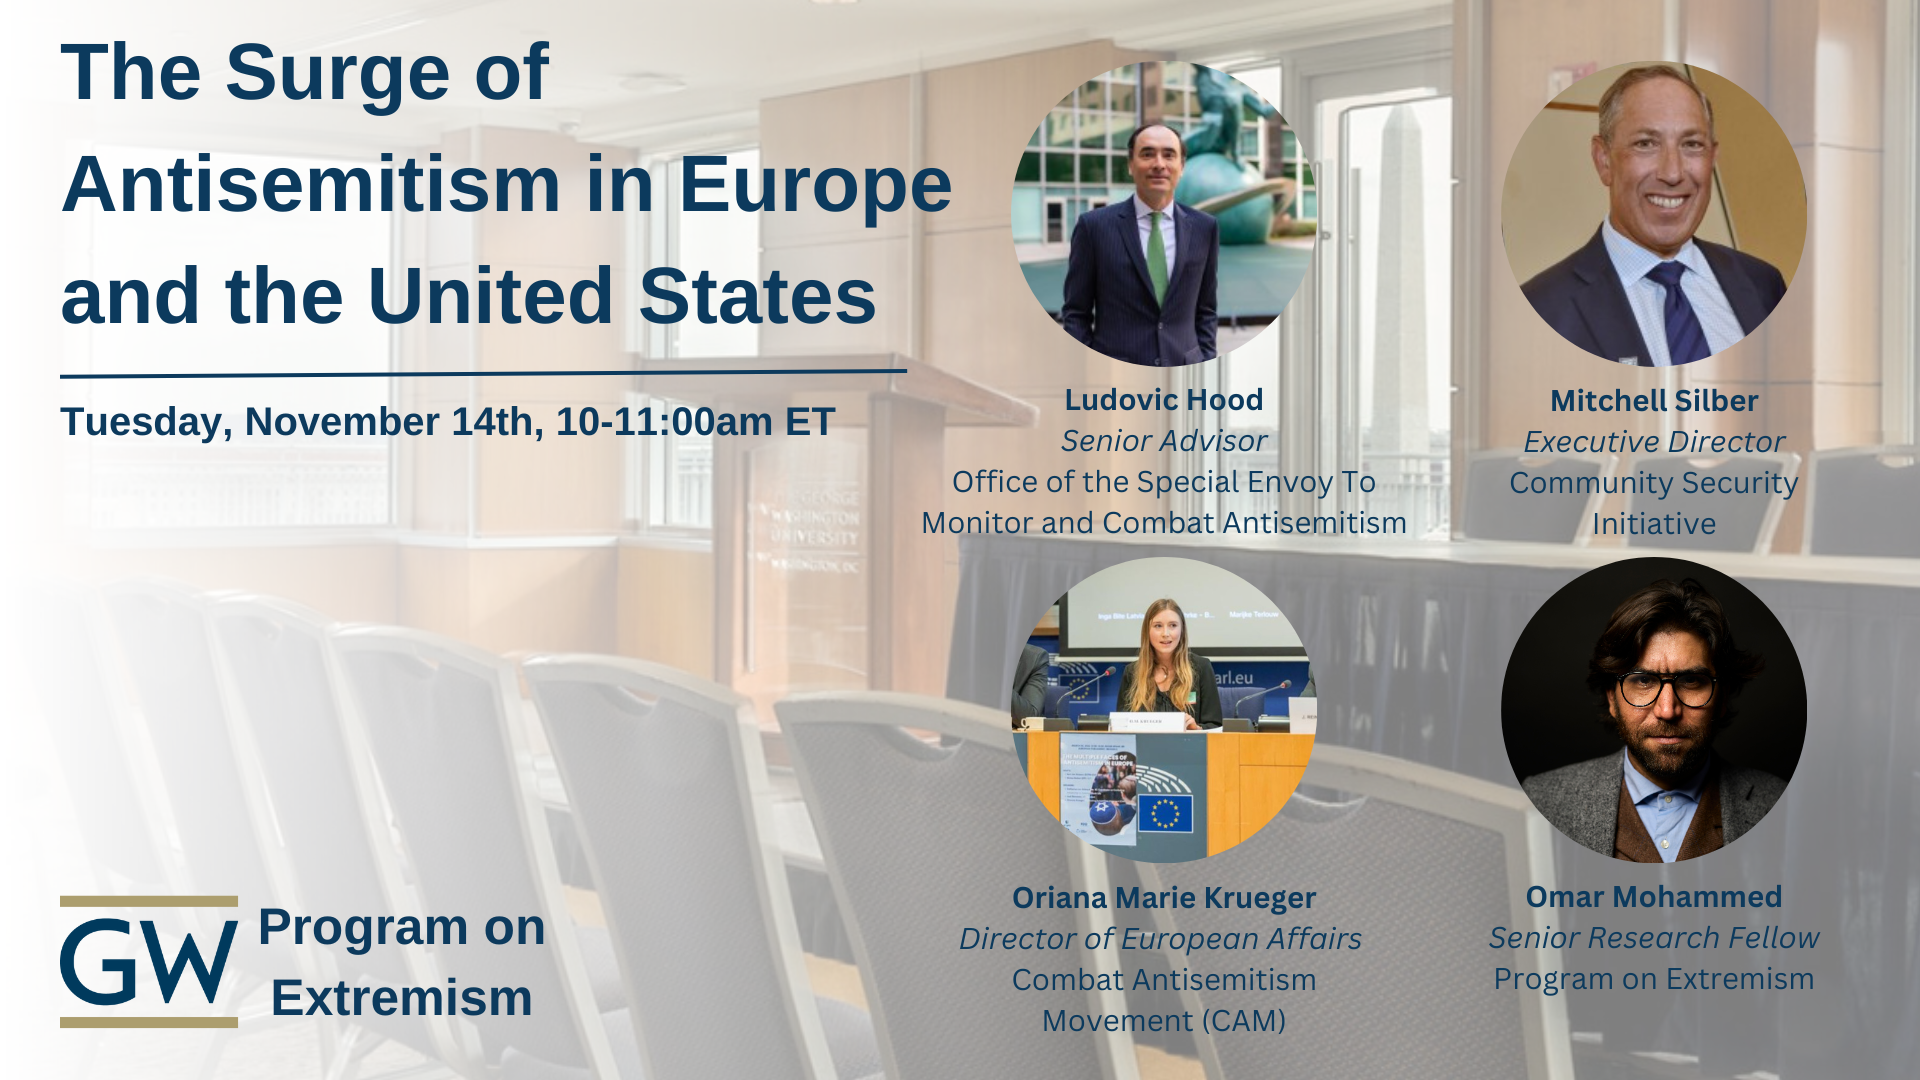 The Surge of Antisemitism in Europe and the United States